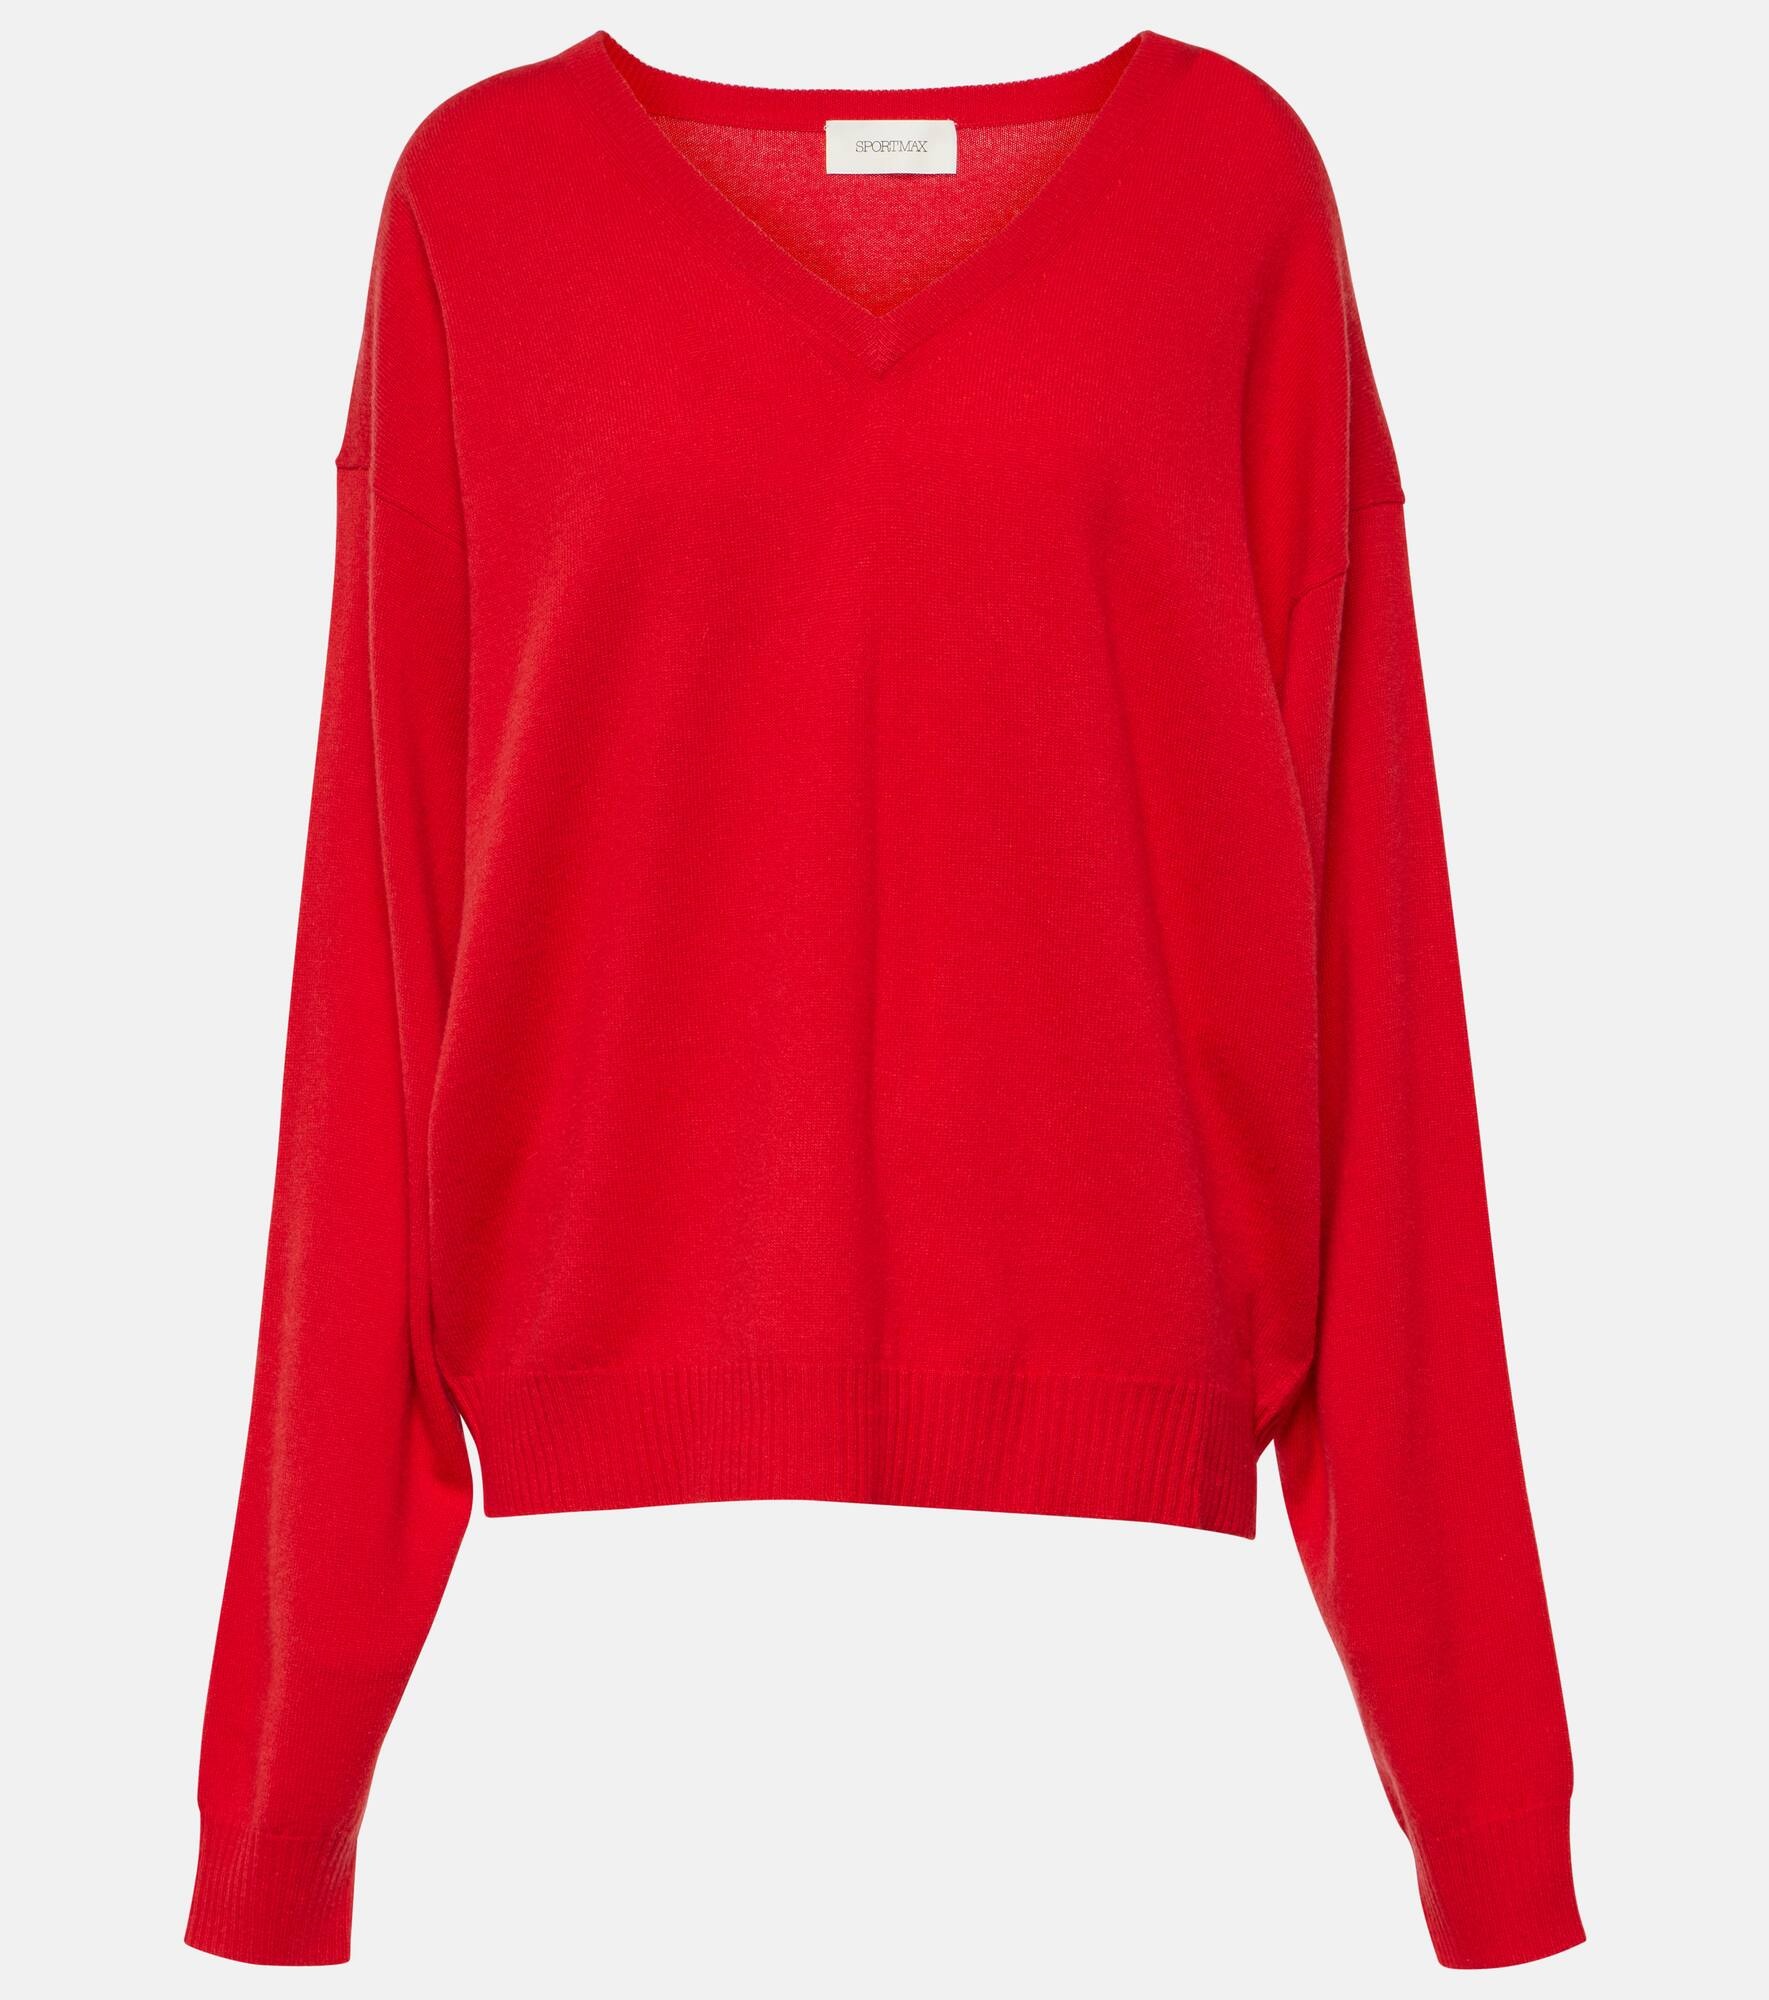 Etruria wool and cashmere sweater - 1